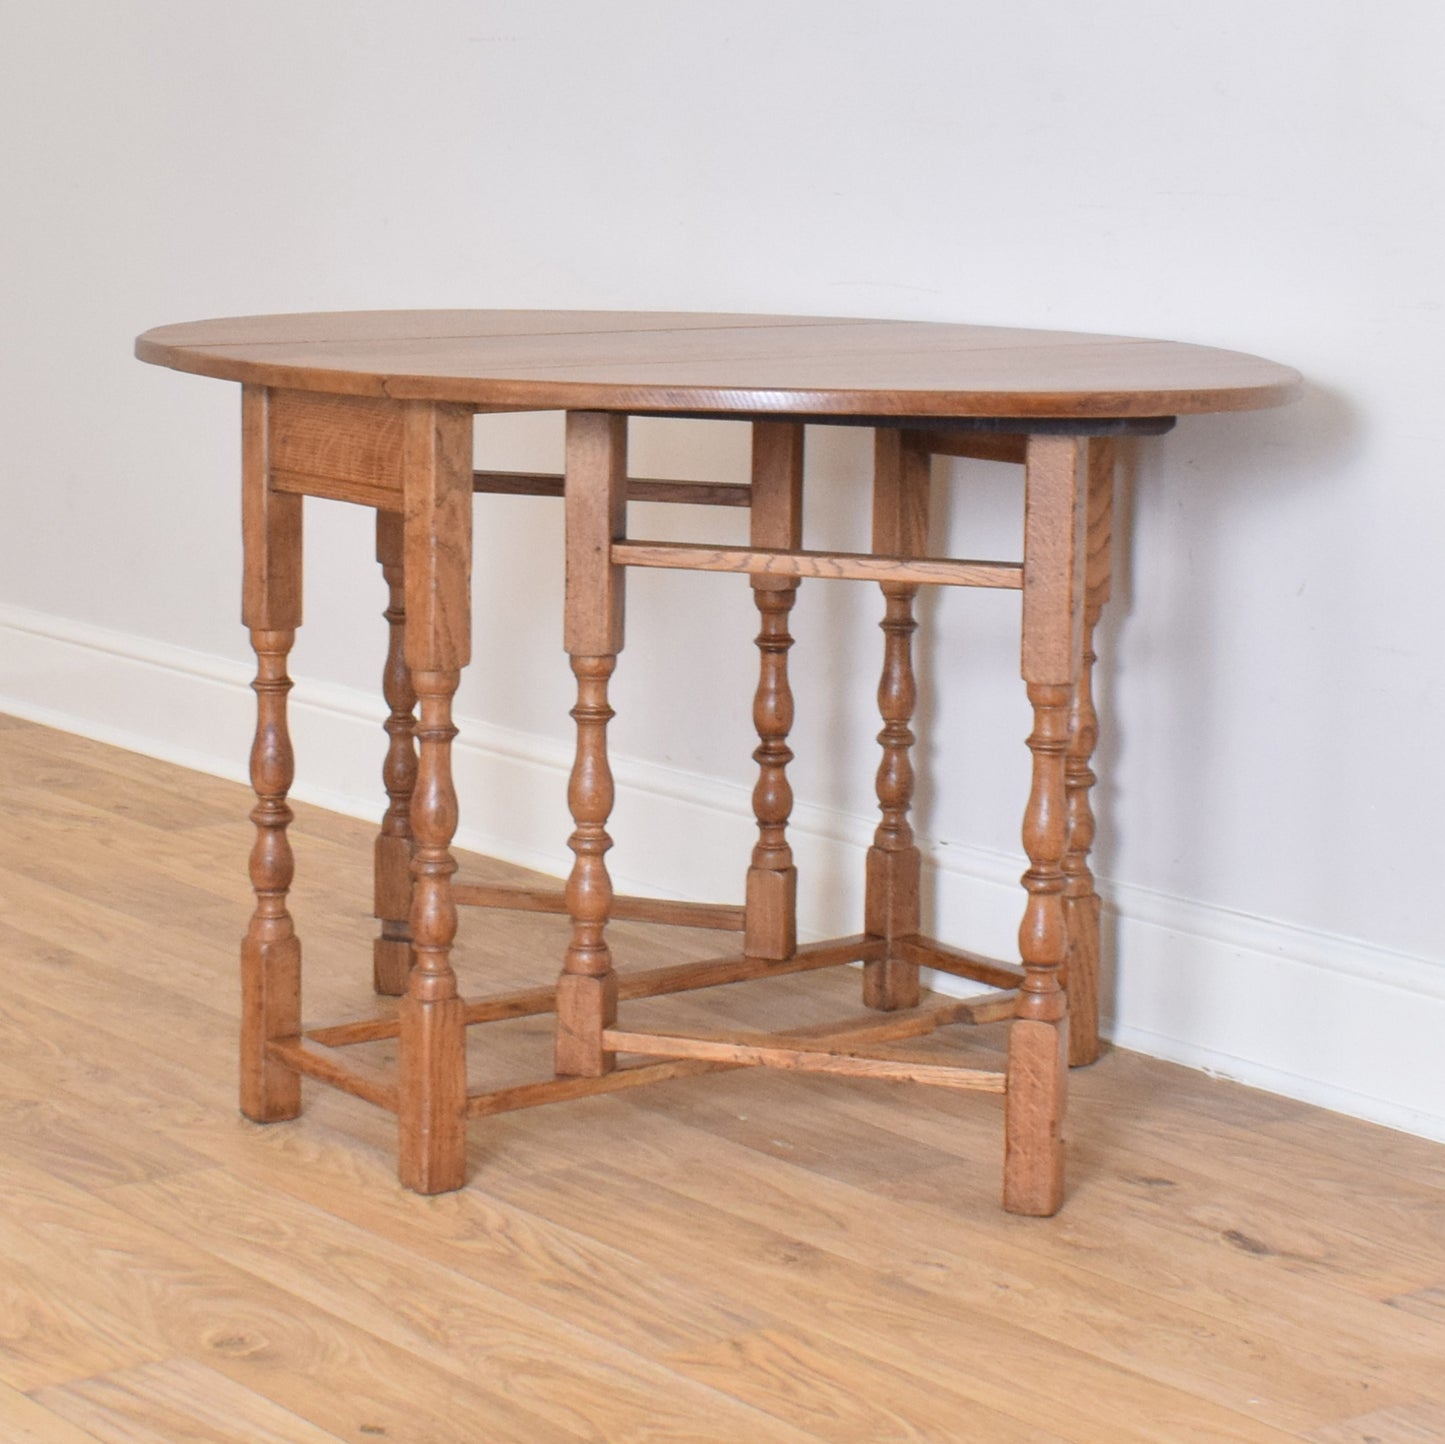 Drop Leaf Table And Four Chairs